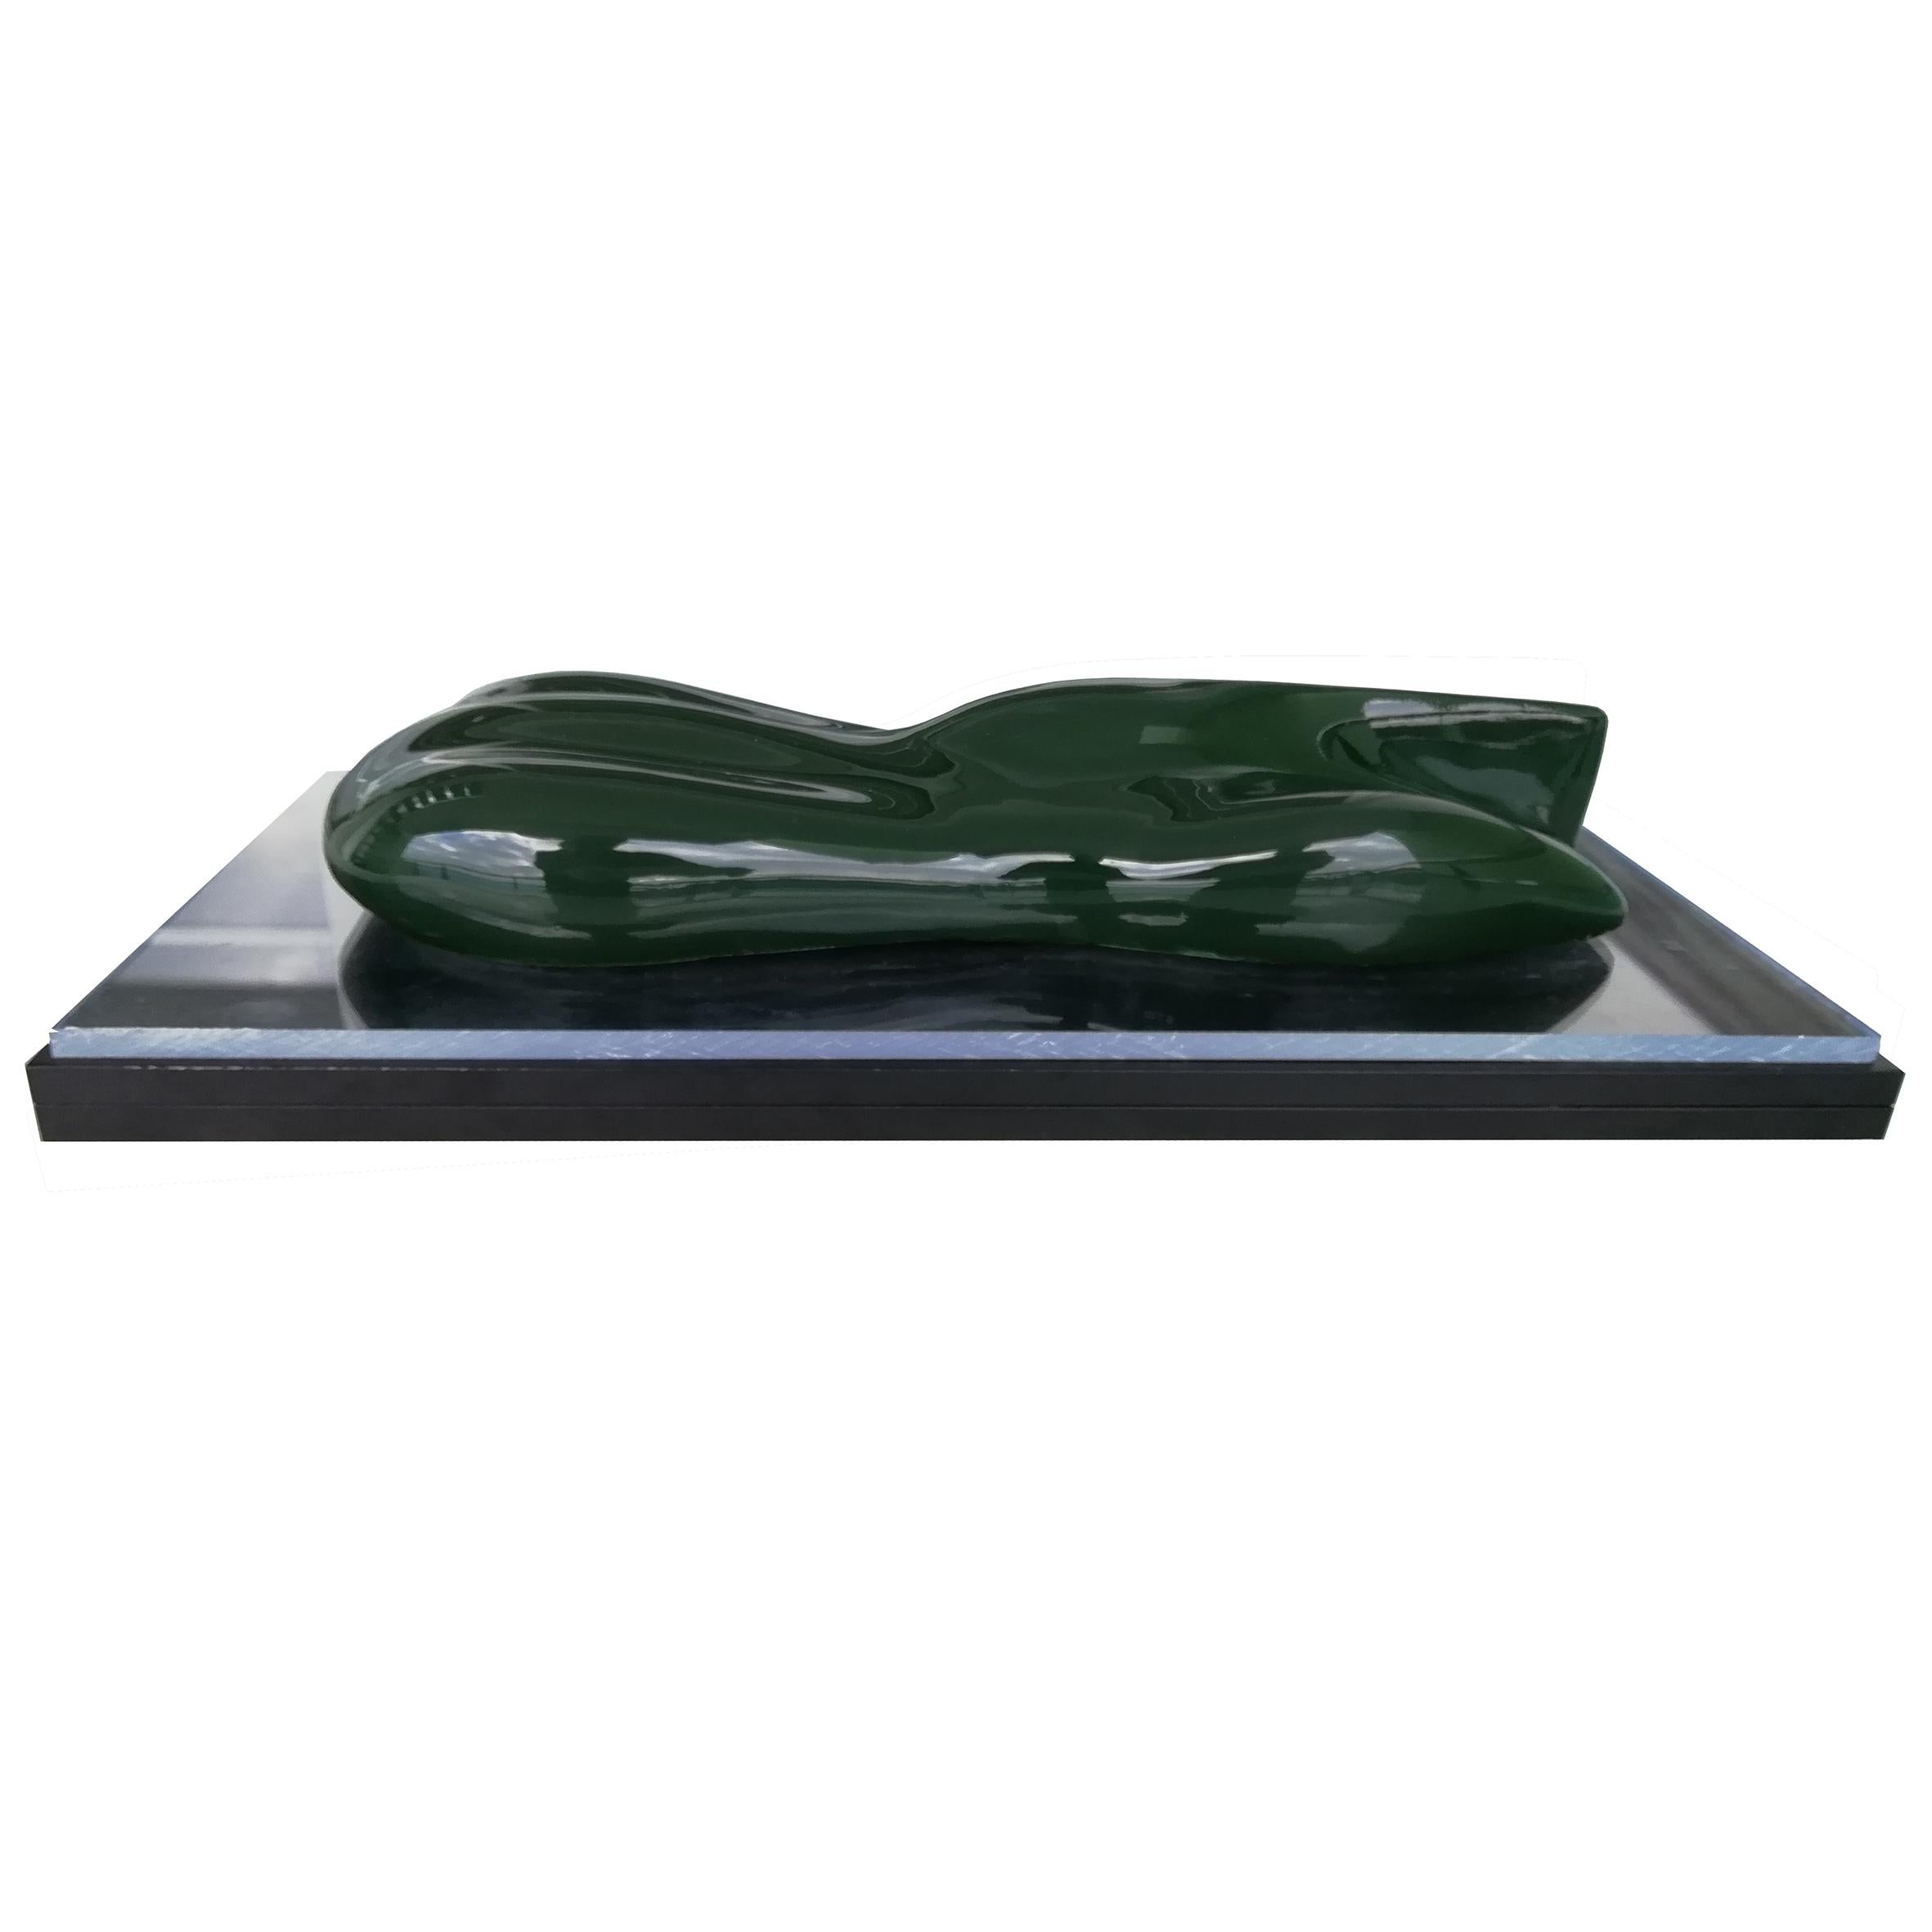 French Belzoni, a Racing Car Sculpture, 